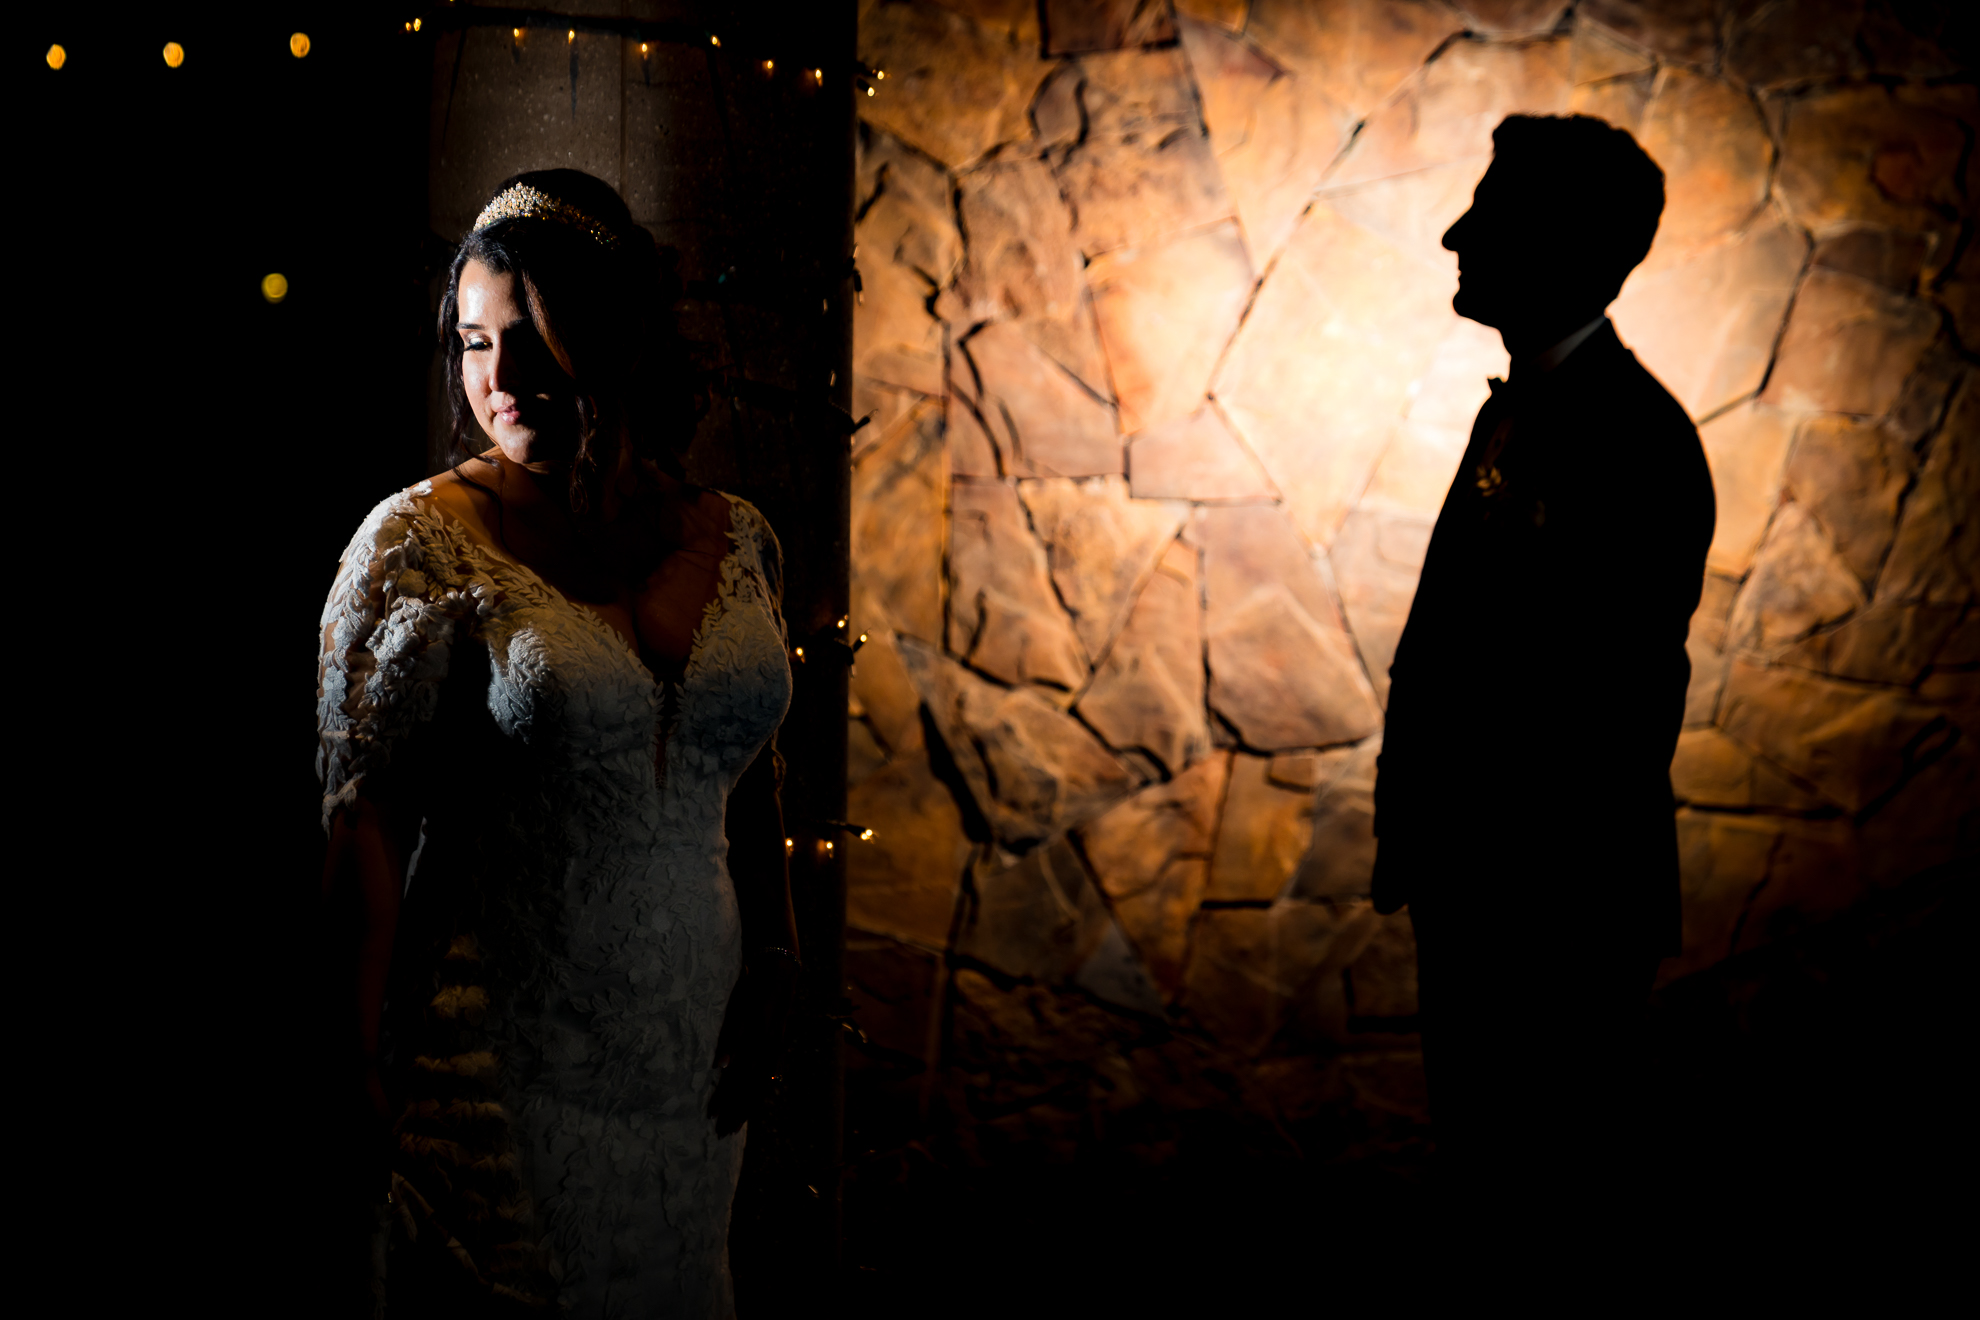 ThomasKim_photography A bride and groom posing in front of a stone wall at their wedding.